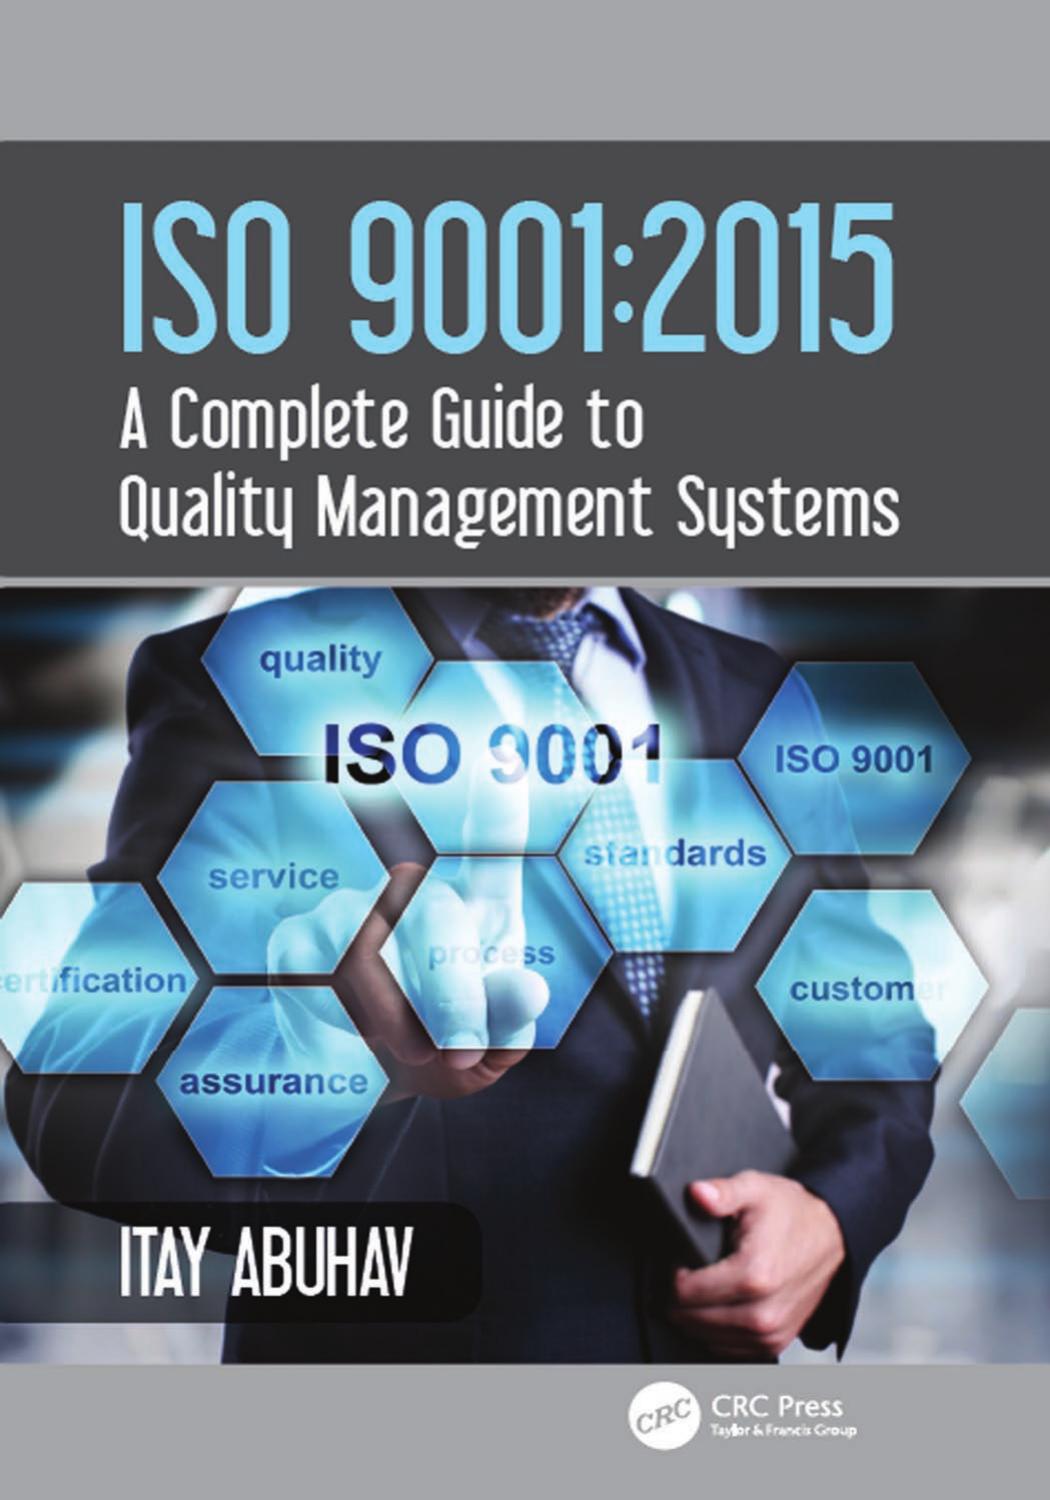 ISO 9001:2015—A Complete Guide to Quality Management Systems